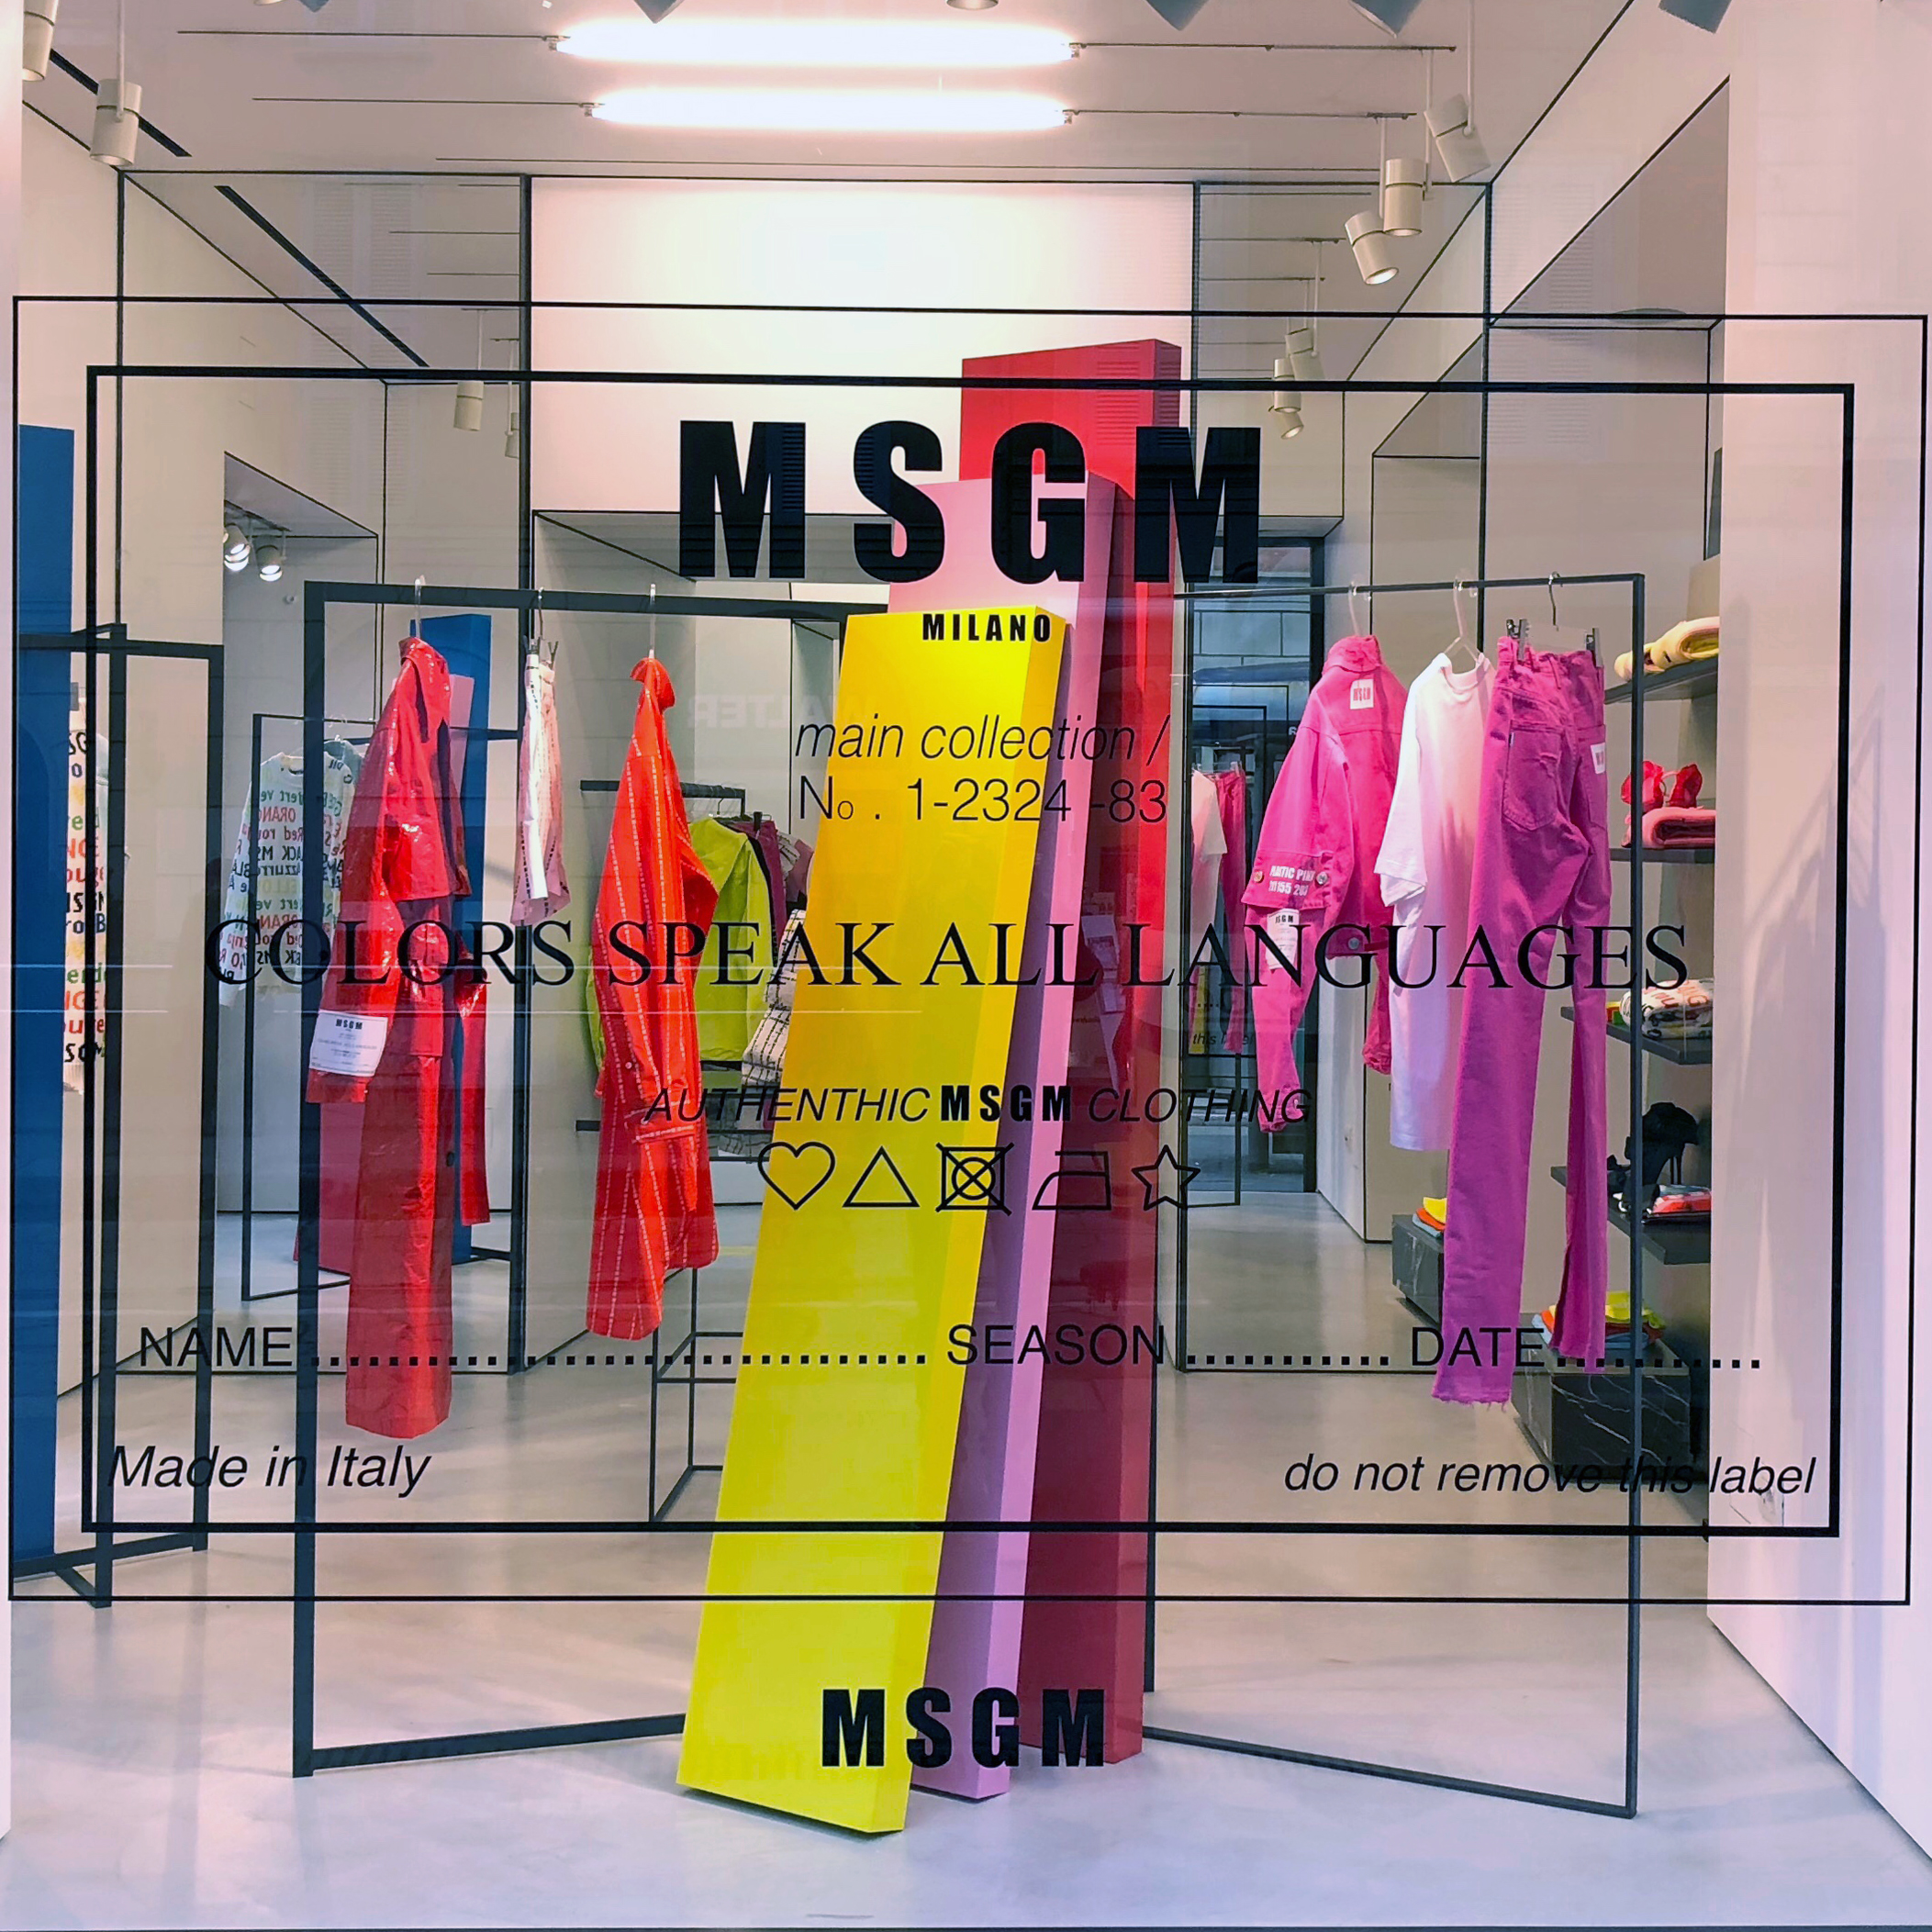 MSGM window display with pink yellow and red colorblock totems, stickers